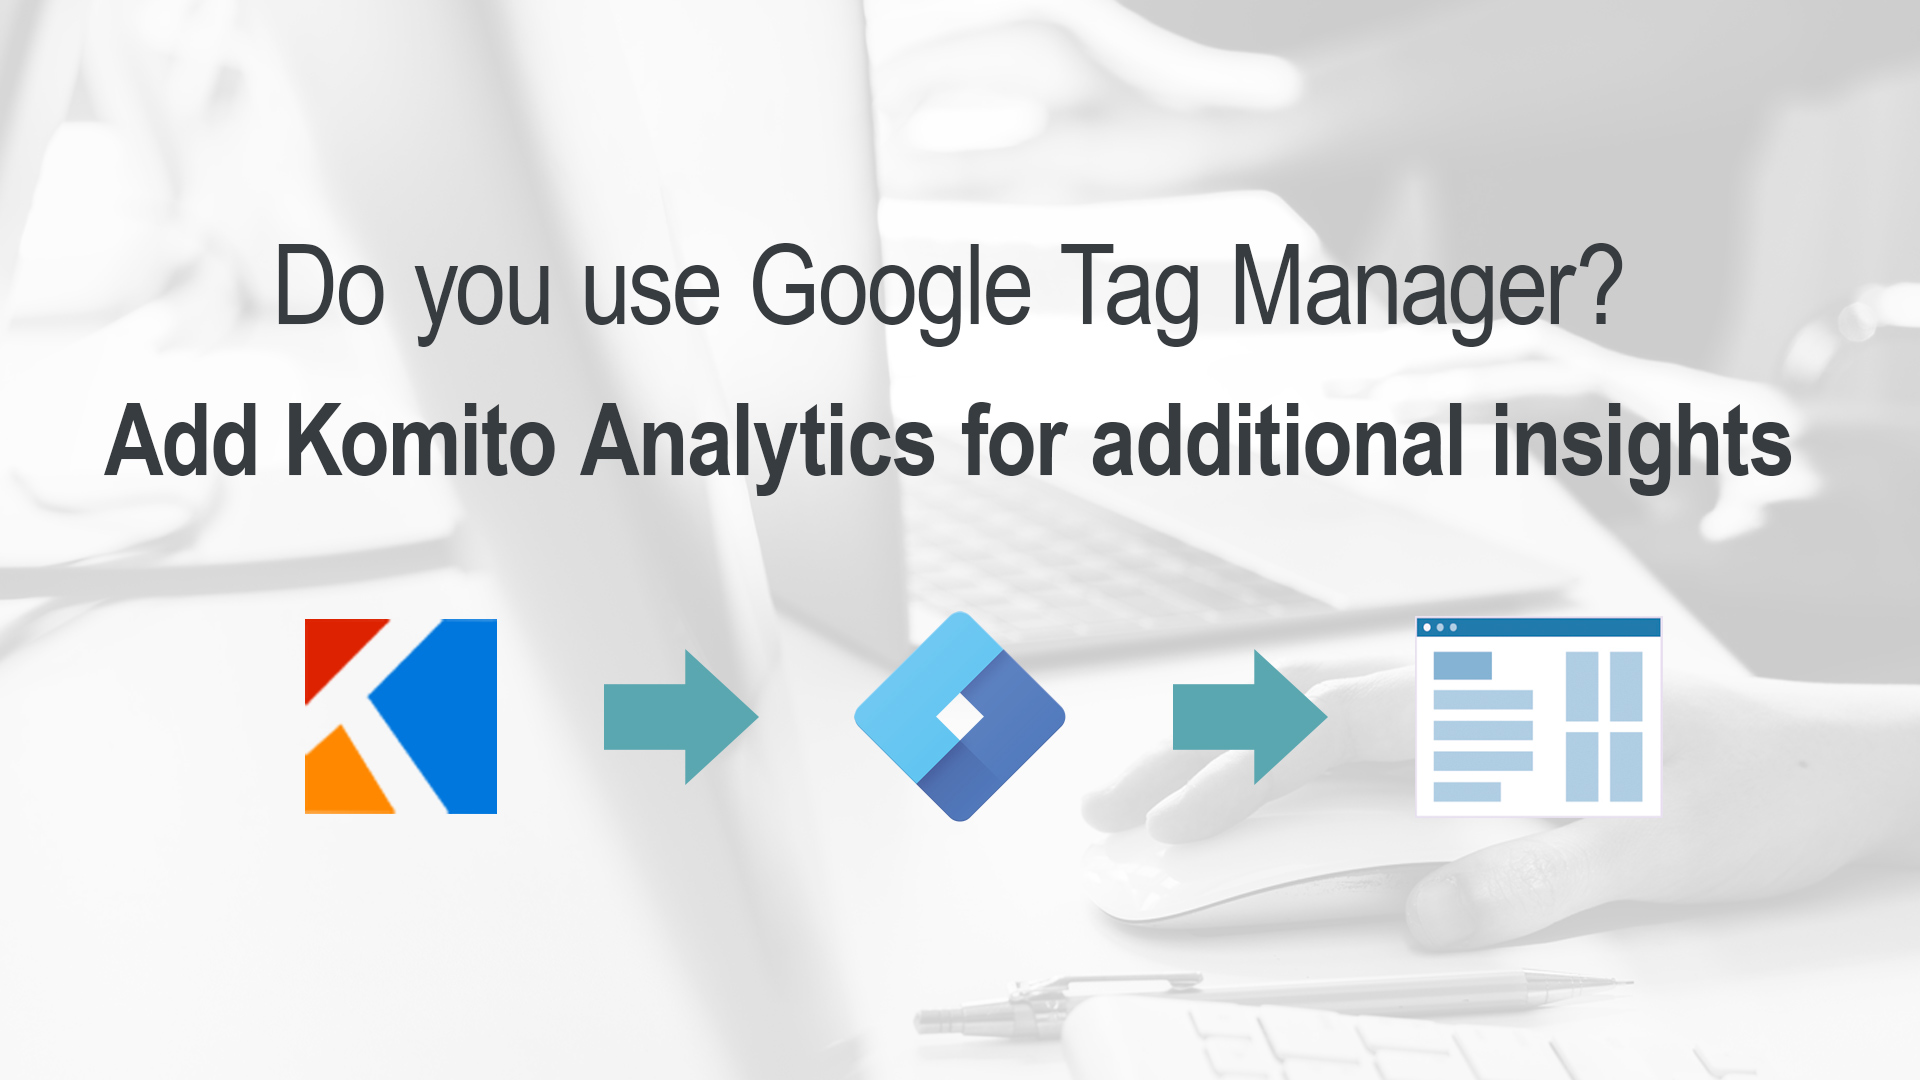 How to integrate Komito Analytics using Google Tag Manager?